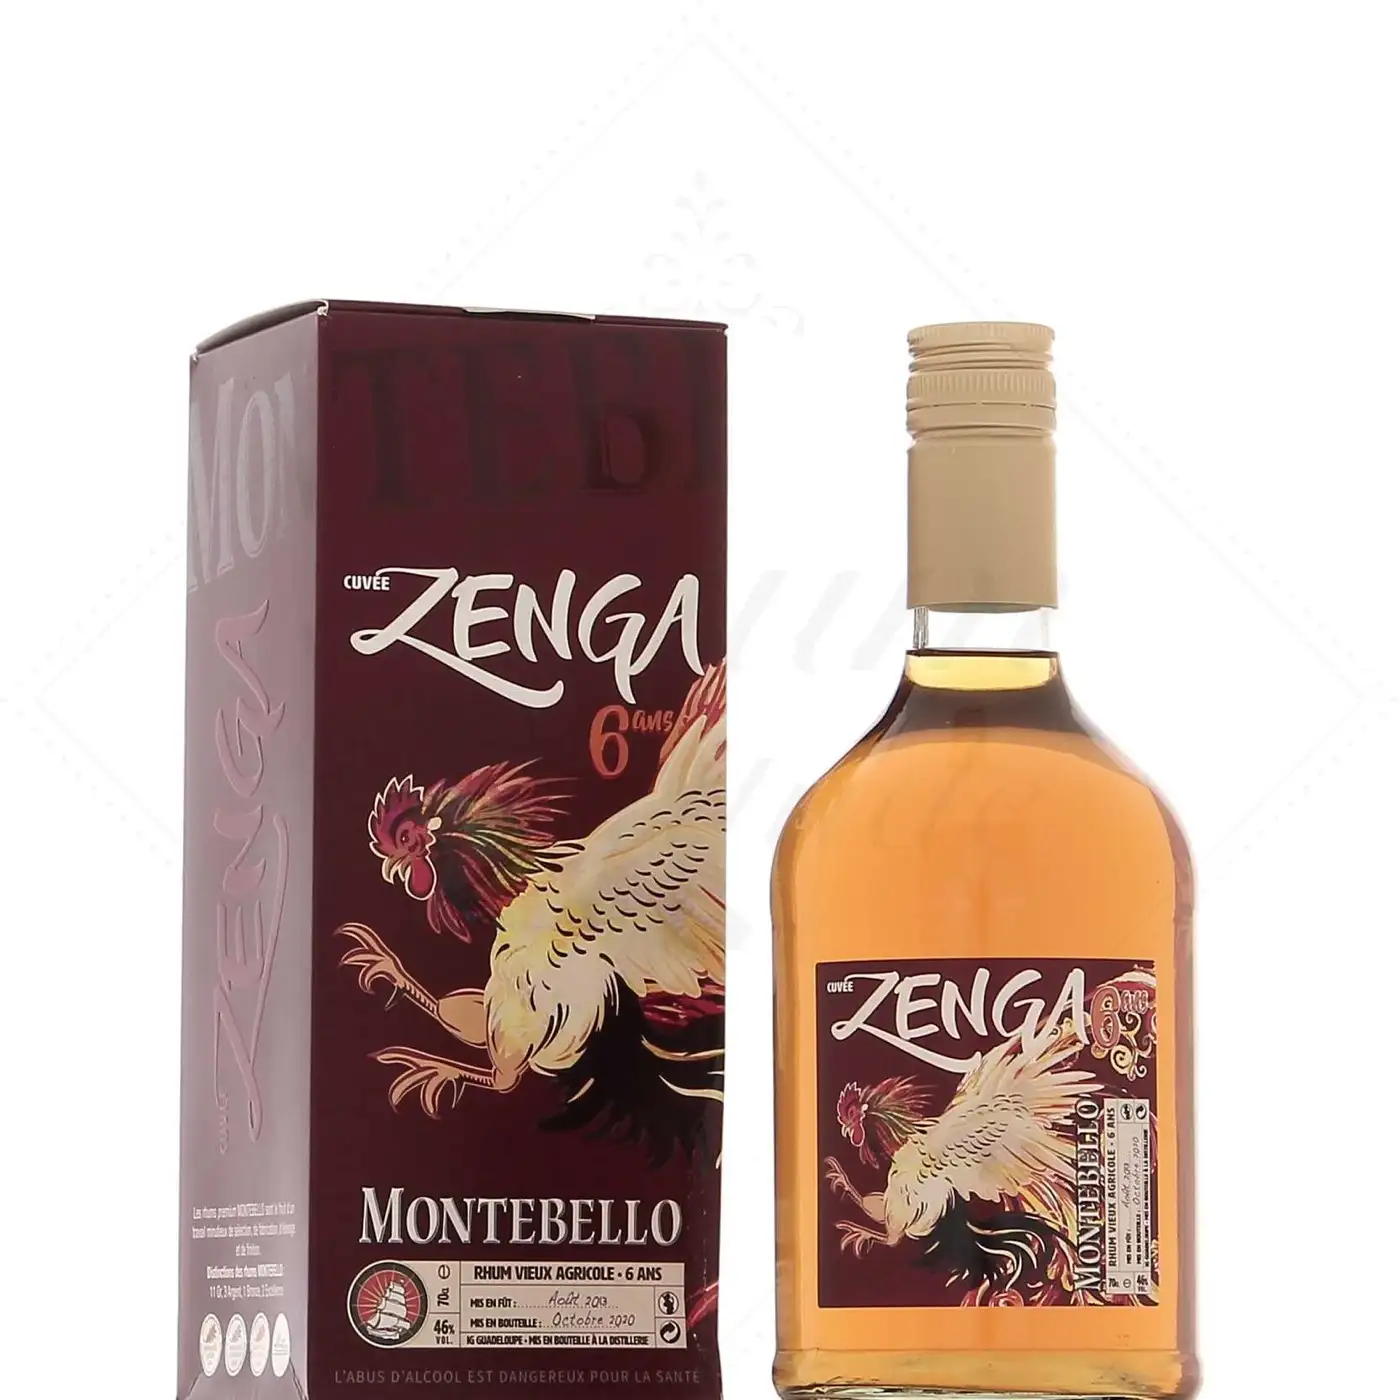 Image of the front of the bottle of the rum Montebello Zenga